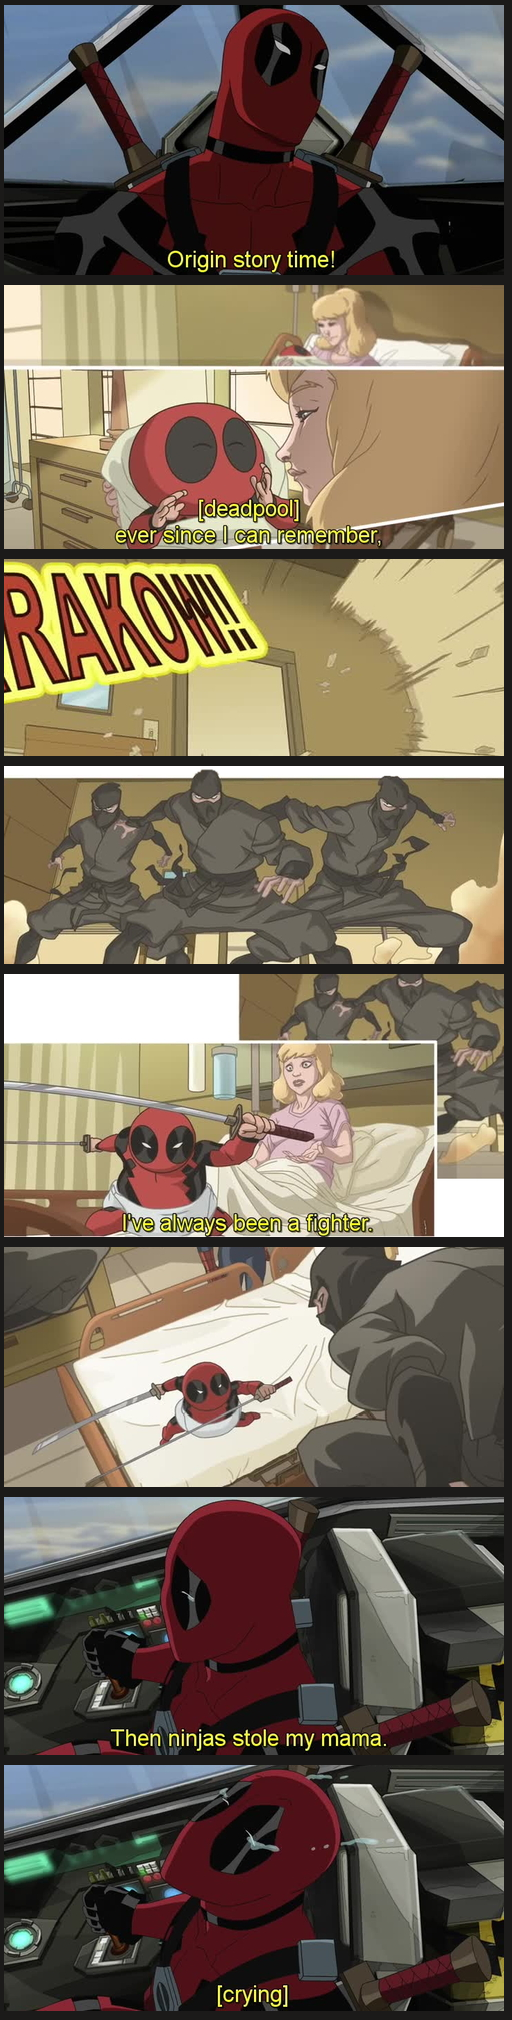 How it began. probably posted before, but it's worth reposting it.. Who doesn't love Deadpool?